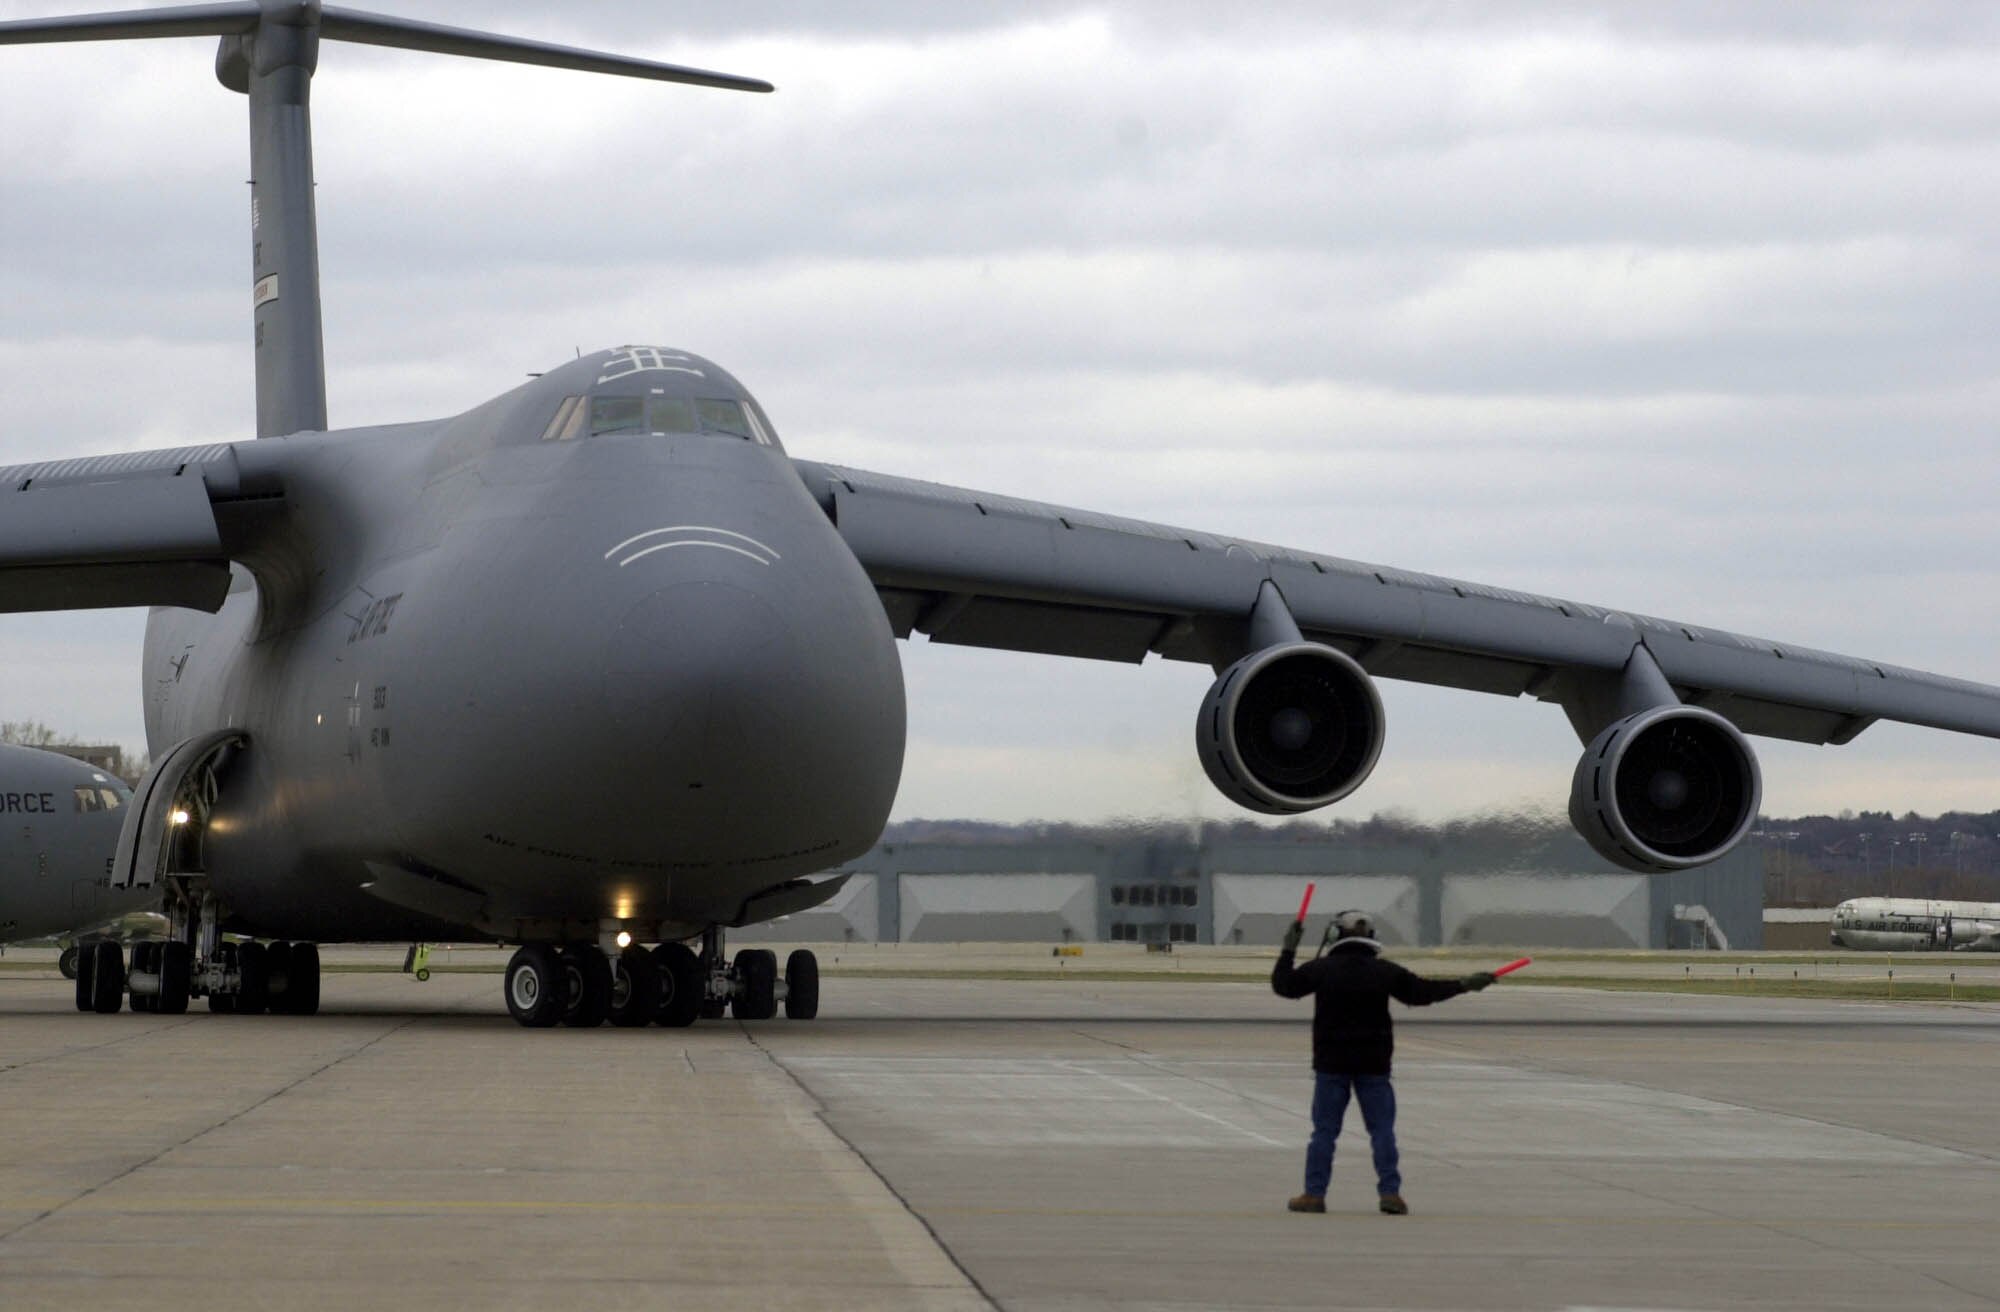 A C-5 Galaxy from Wright-Patterson Air Force Base, Ohio, fully laden with equipment and people from the 934th Airlift Wing taxis to the runway bound for Gulfport, Miss., for the Operational Readiness Exercise
(Air Force Photo/Staff Sgt. Michael Edmond).